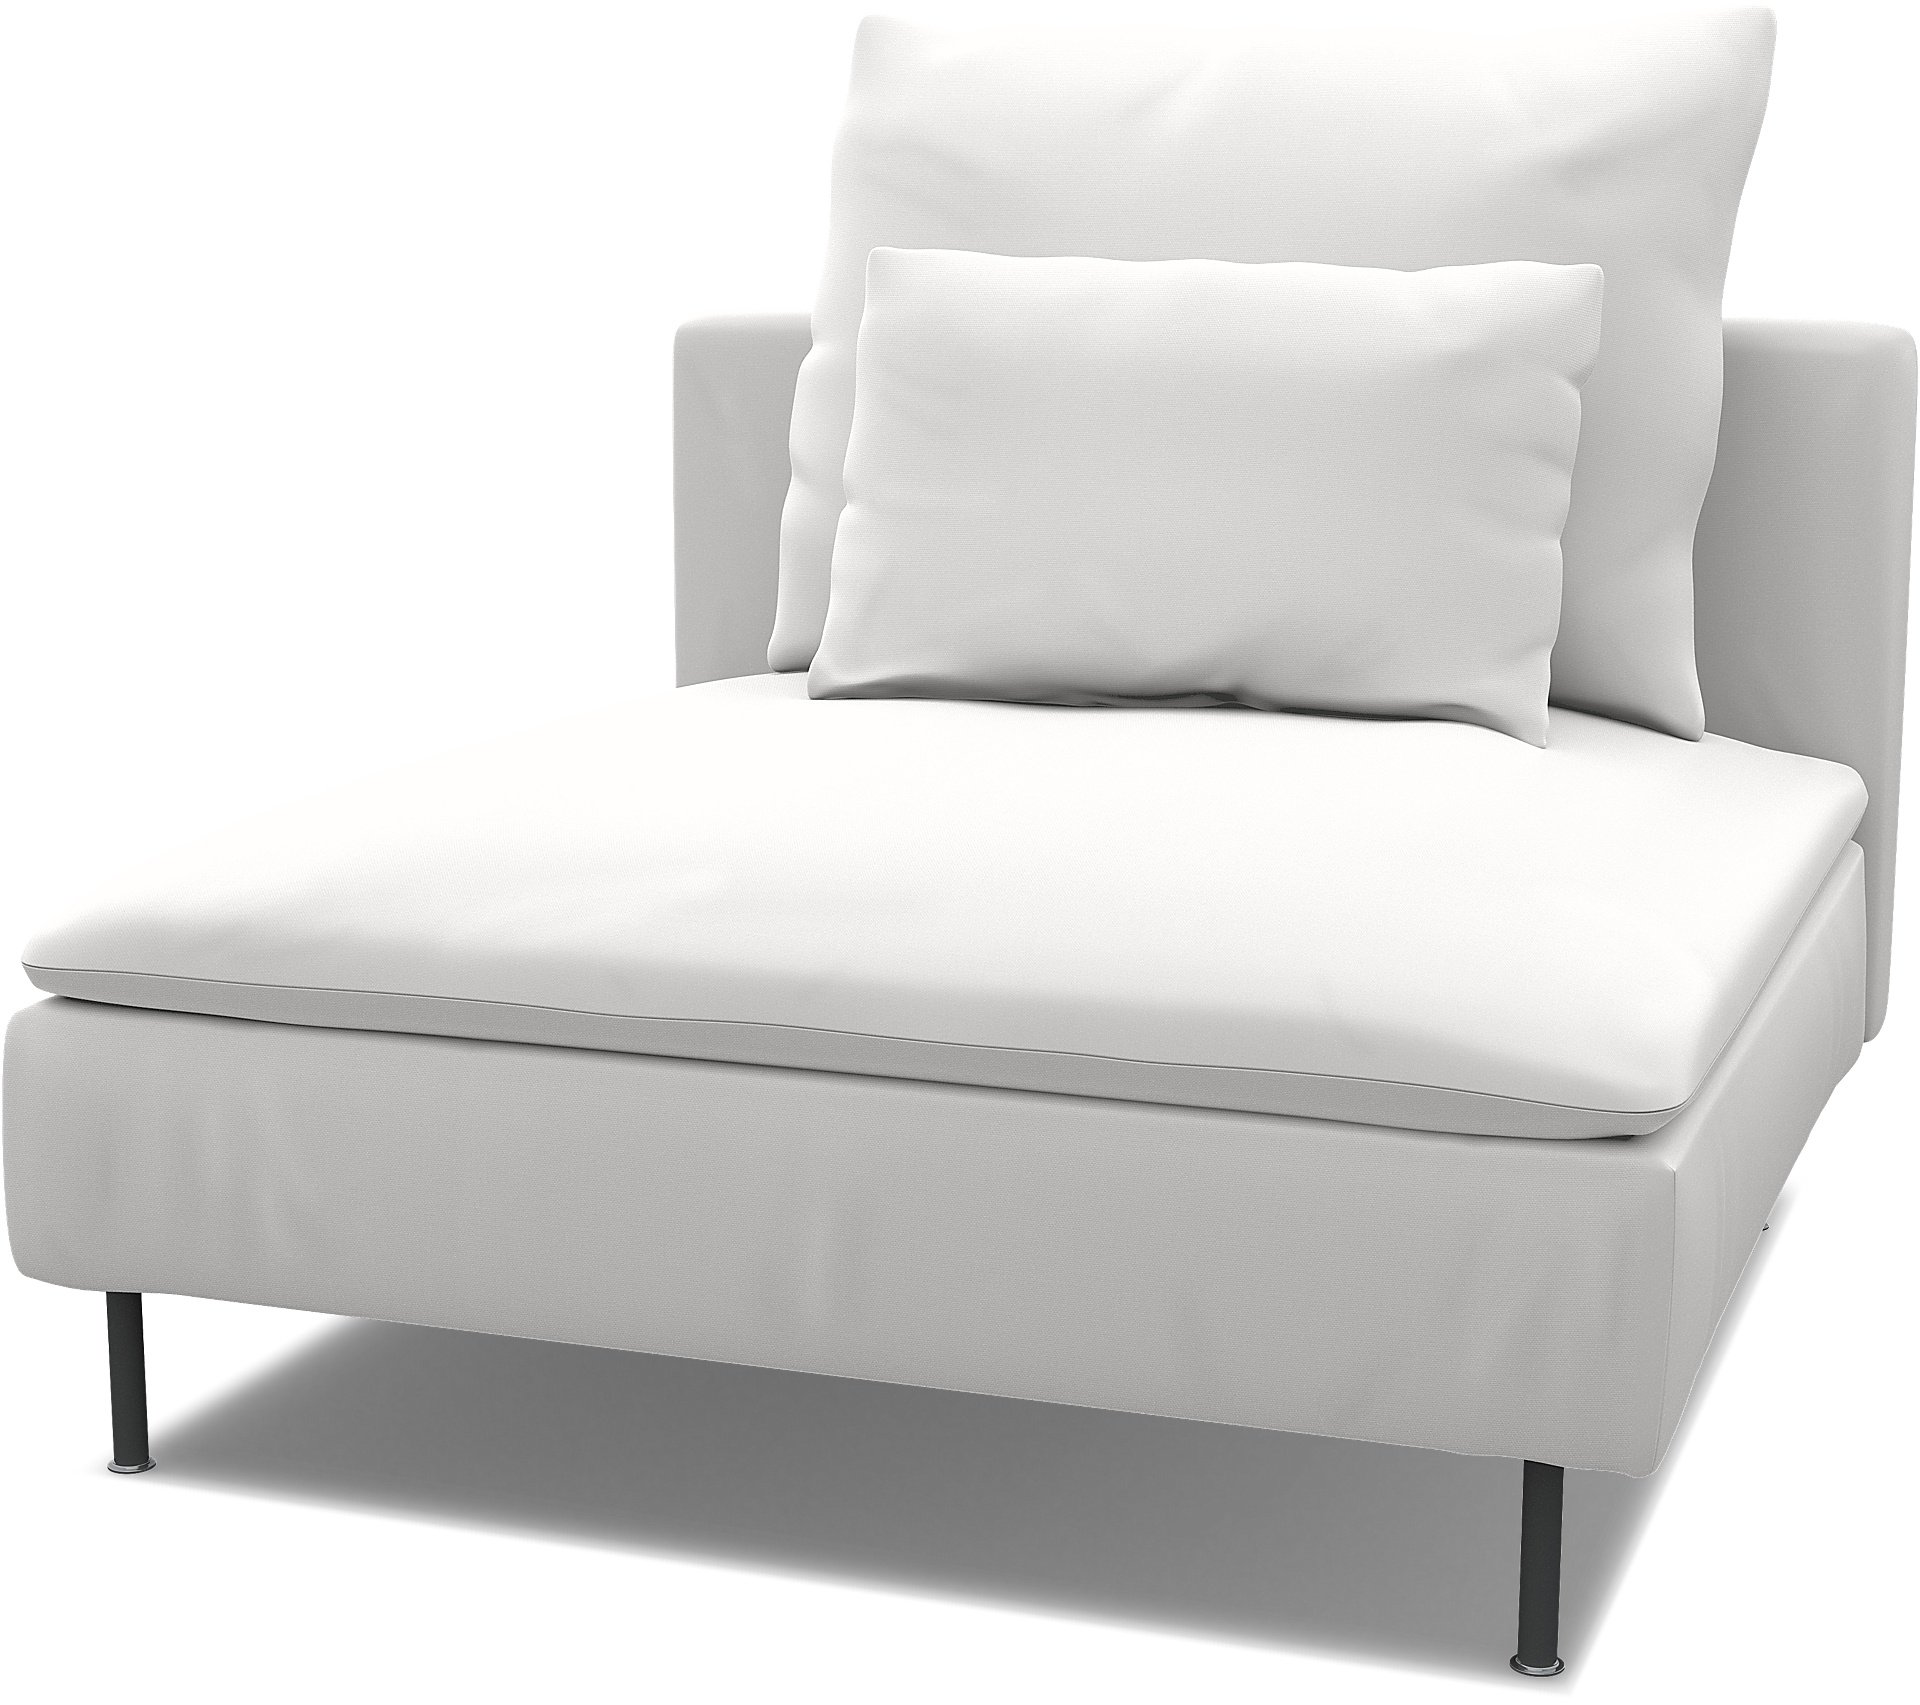 Spare seat cushion cover for SODERHAMN 1 SEAT SECTION , Absolute White, Cotton - Bemz